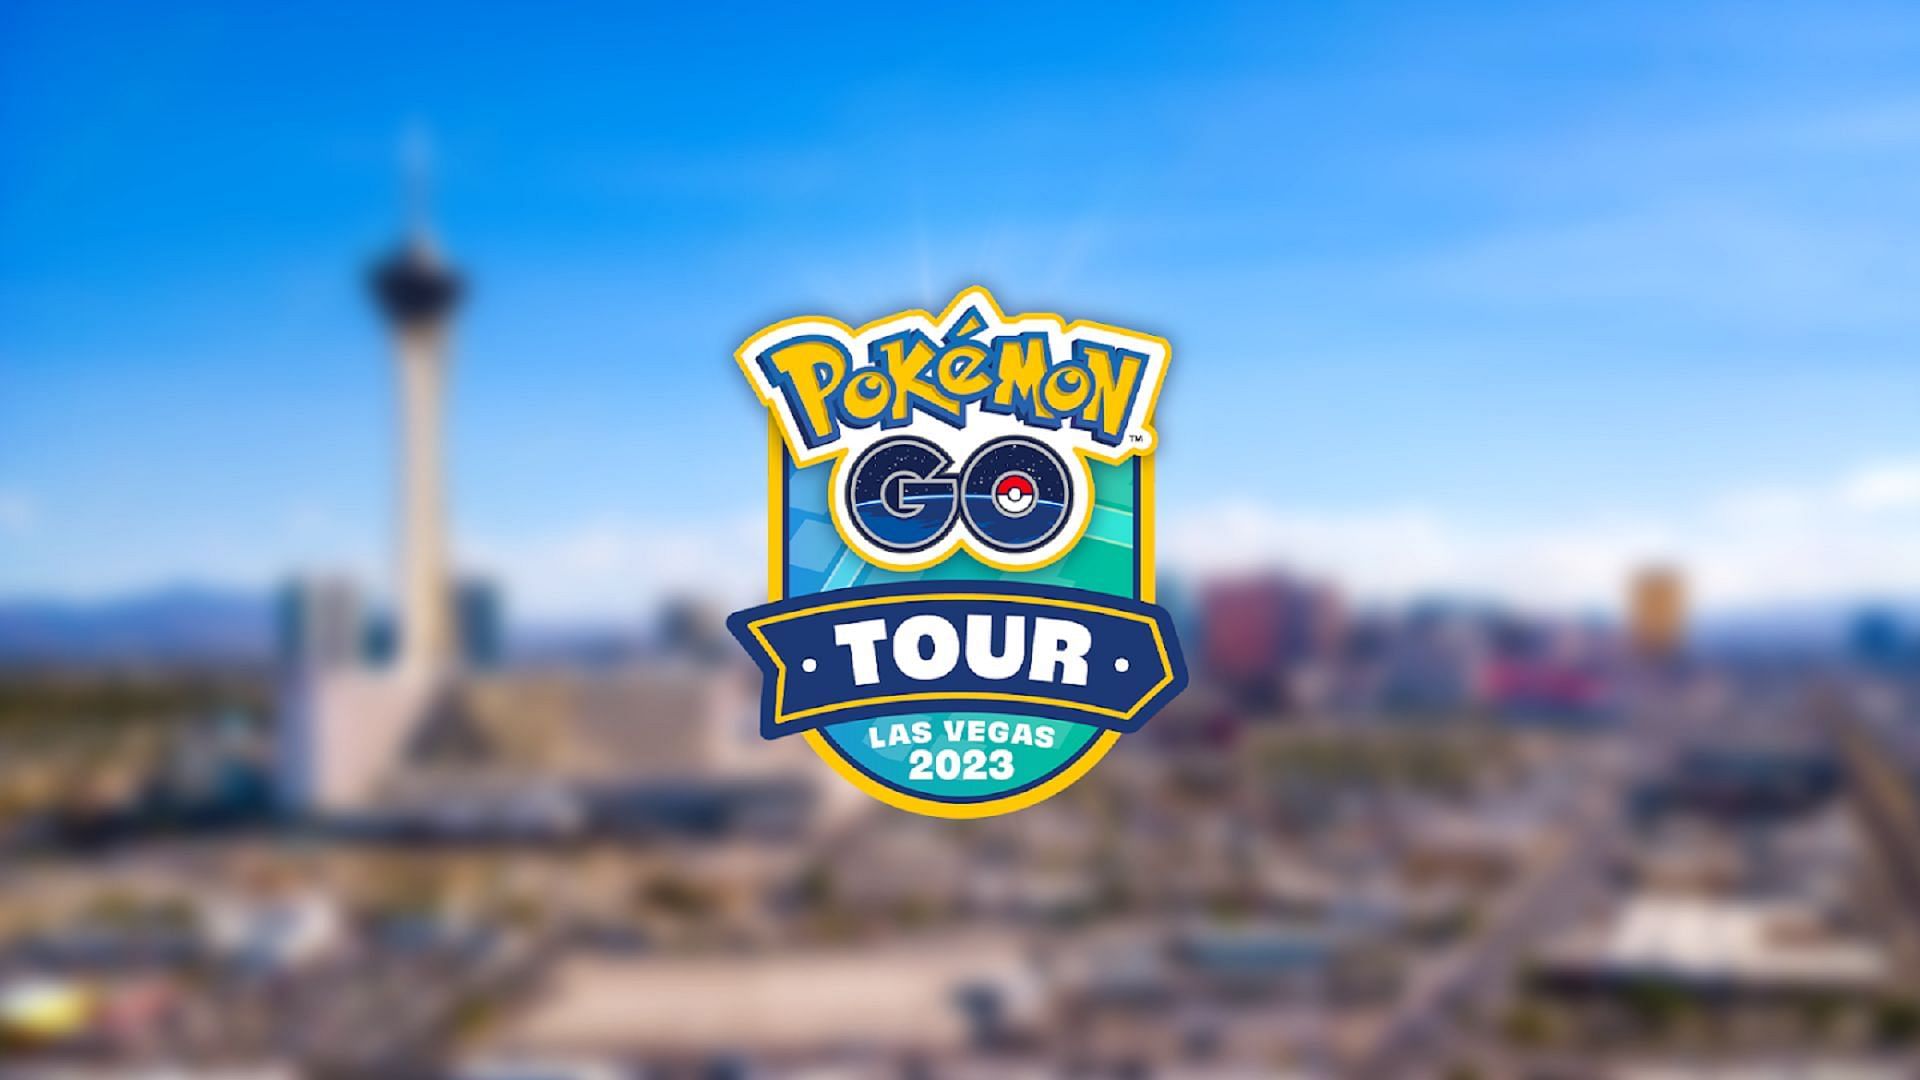 Niantic released a Pokemon GO patch to address Hoenn Tour concerns on Saturday, February 18, 2023 (Image via Niantic)